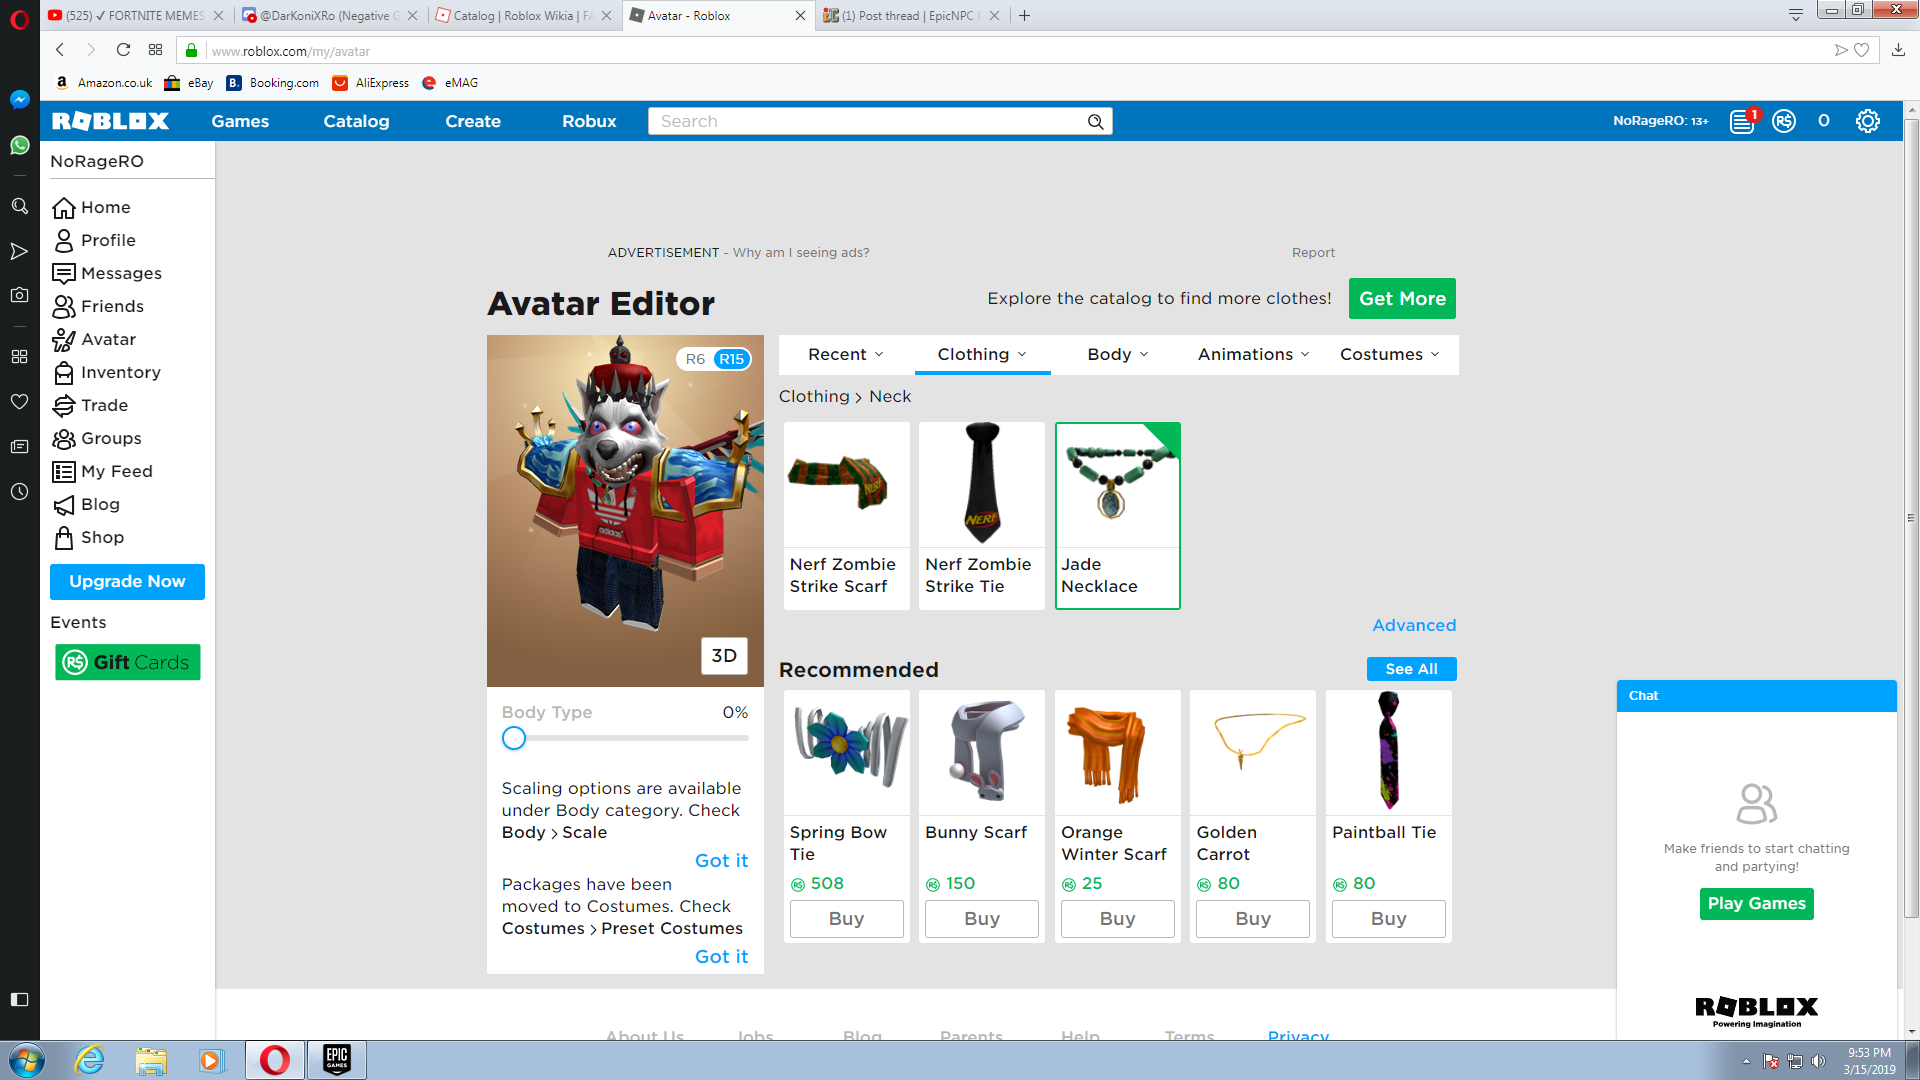 How To Sell An Item In Roblox [SELLING] Roblox account with event items. | EpicNPC Marketplace